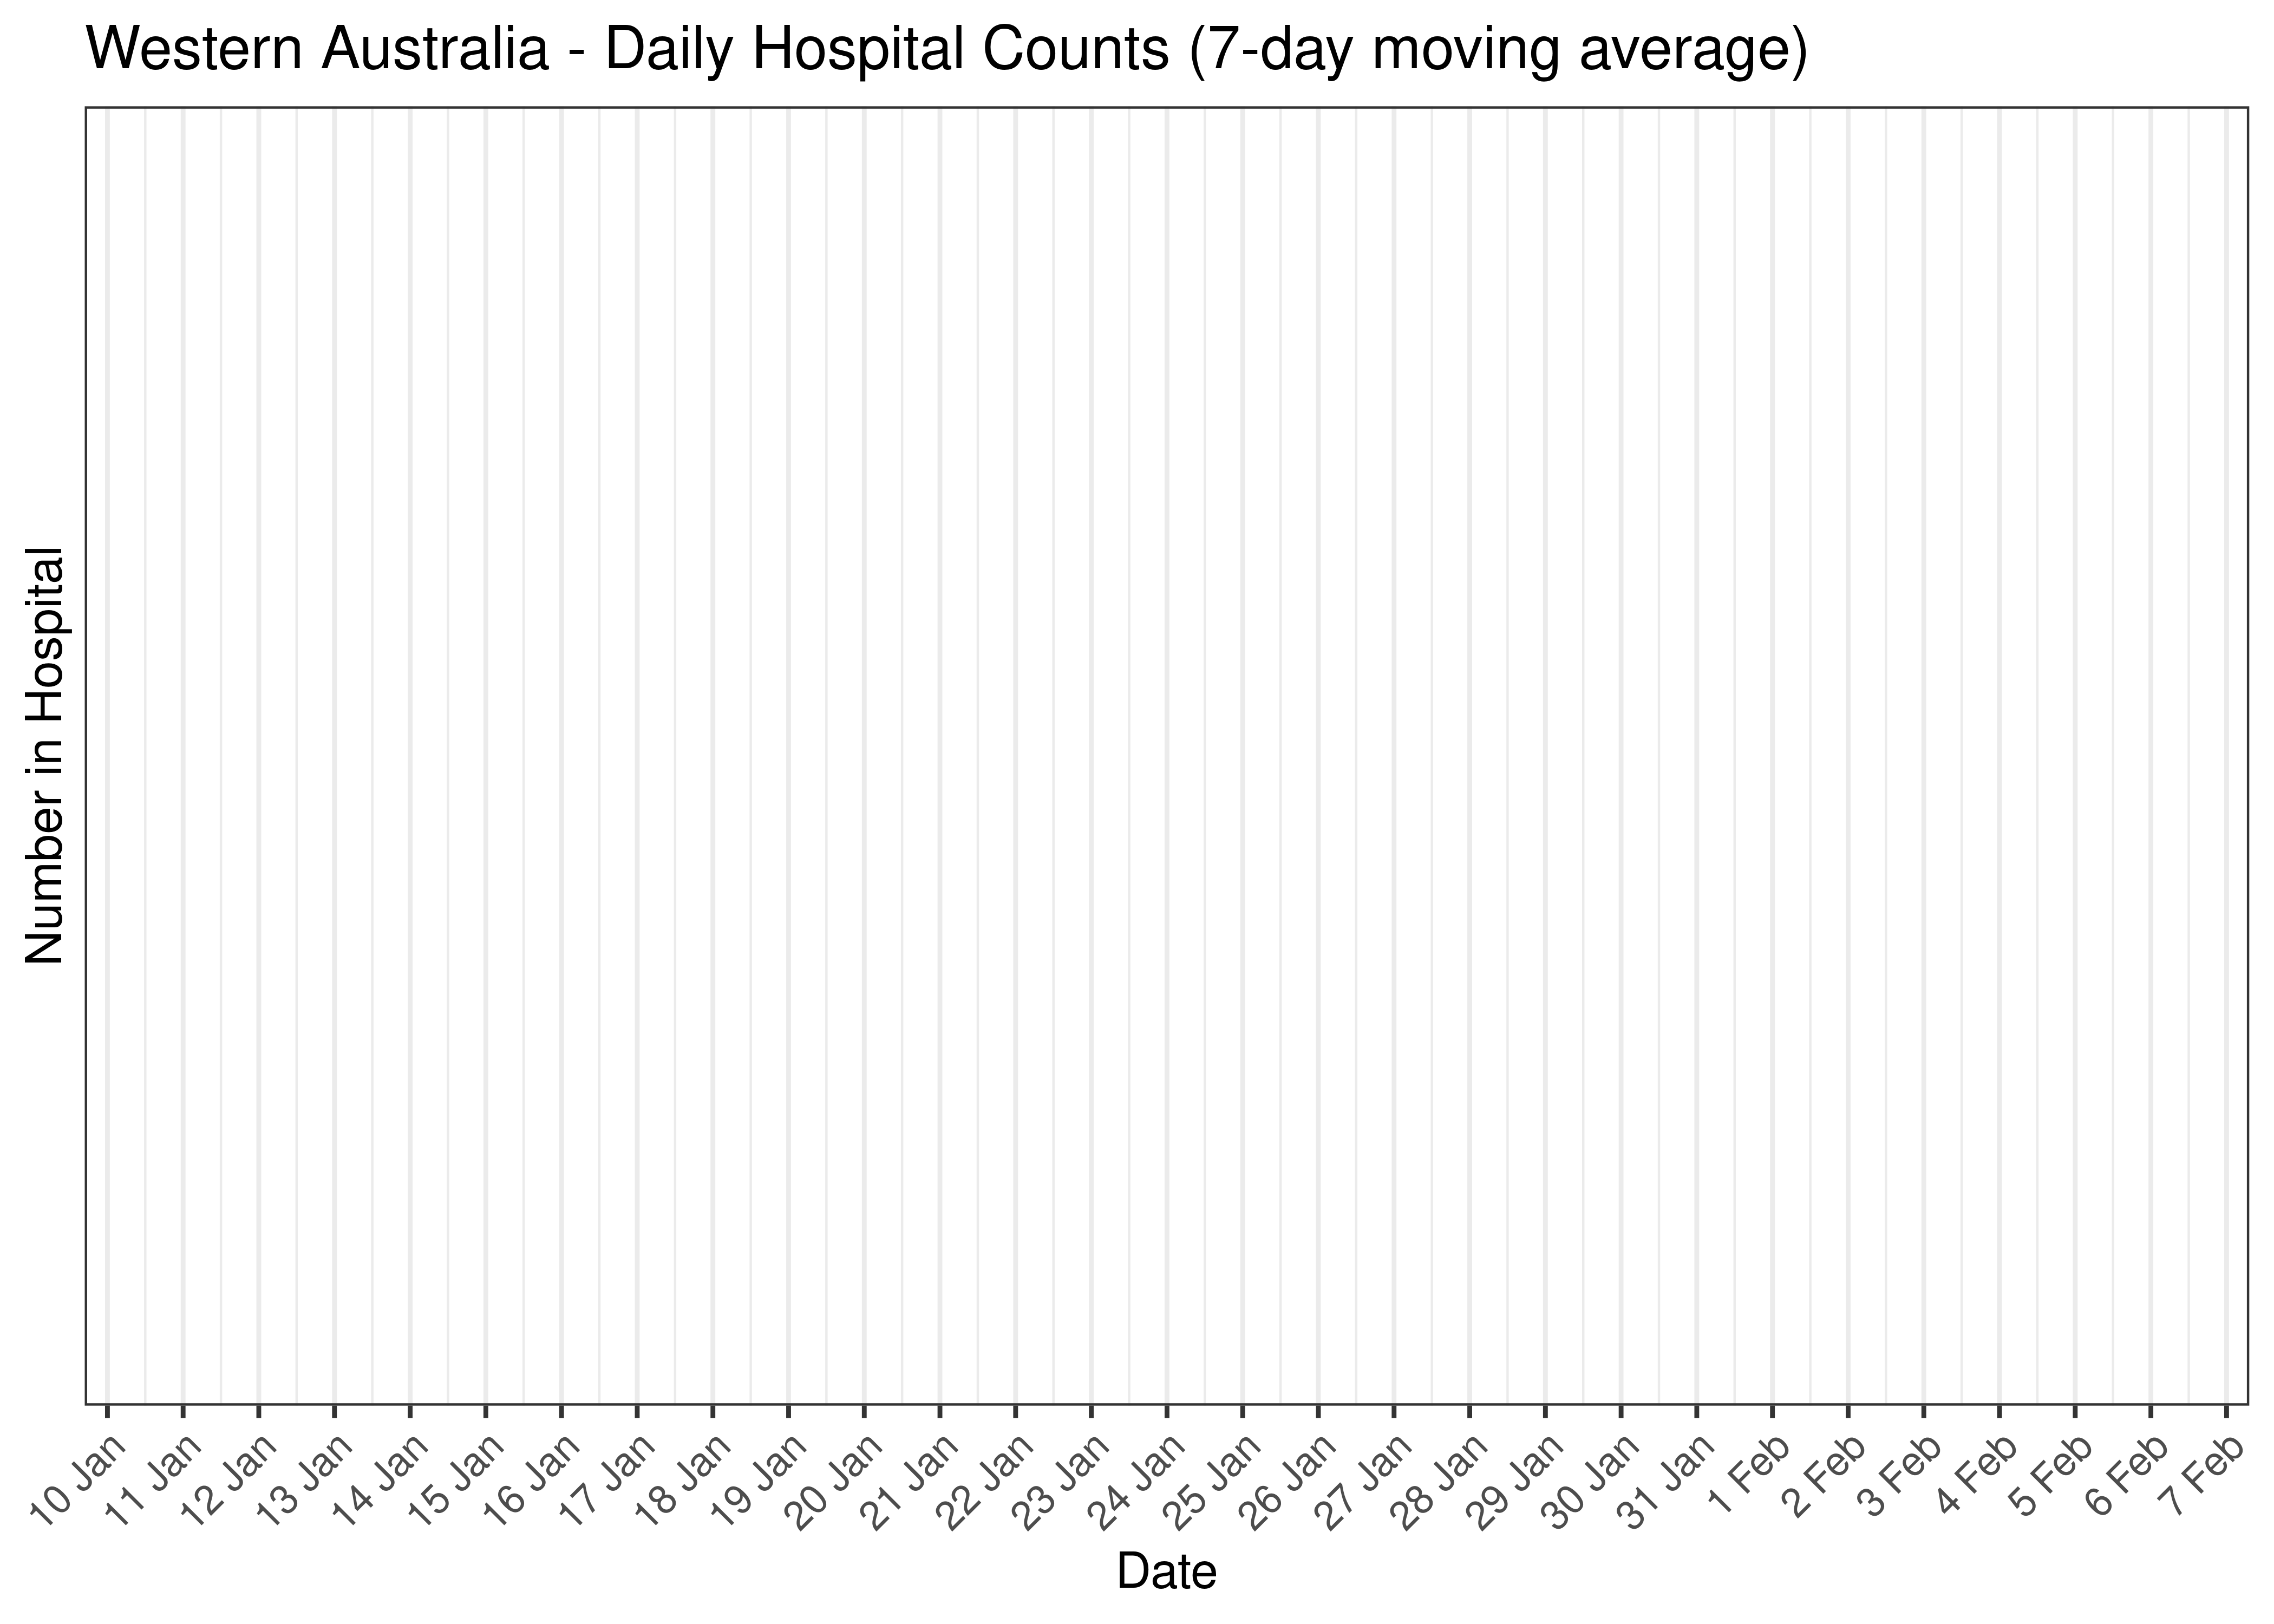 Western Australia - Daily Hospital Counts for Last 30-days (7-day moving average)